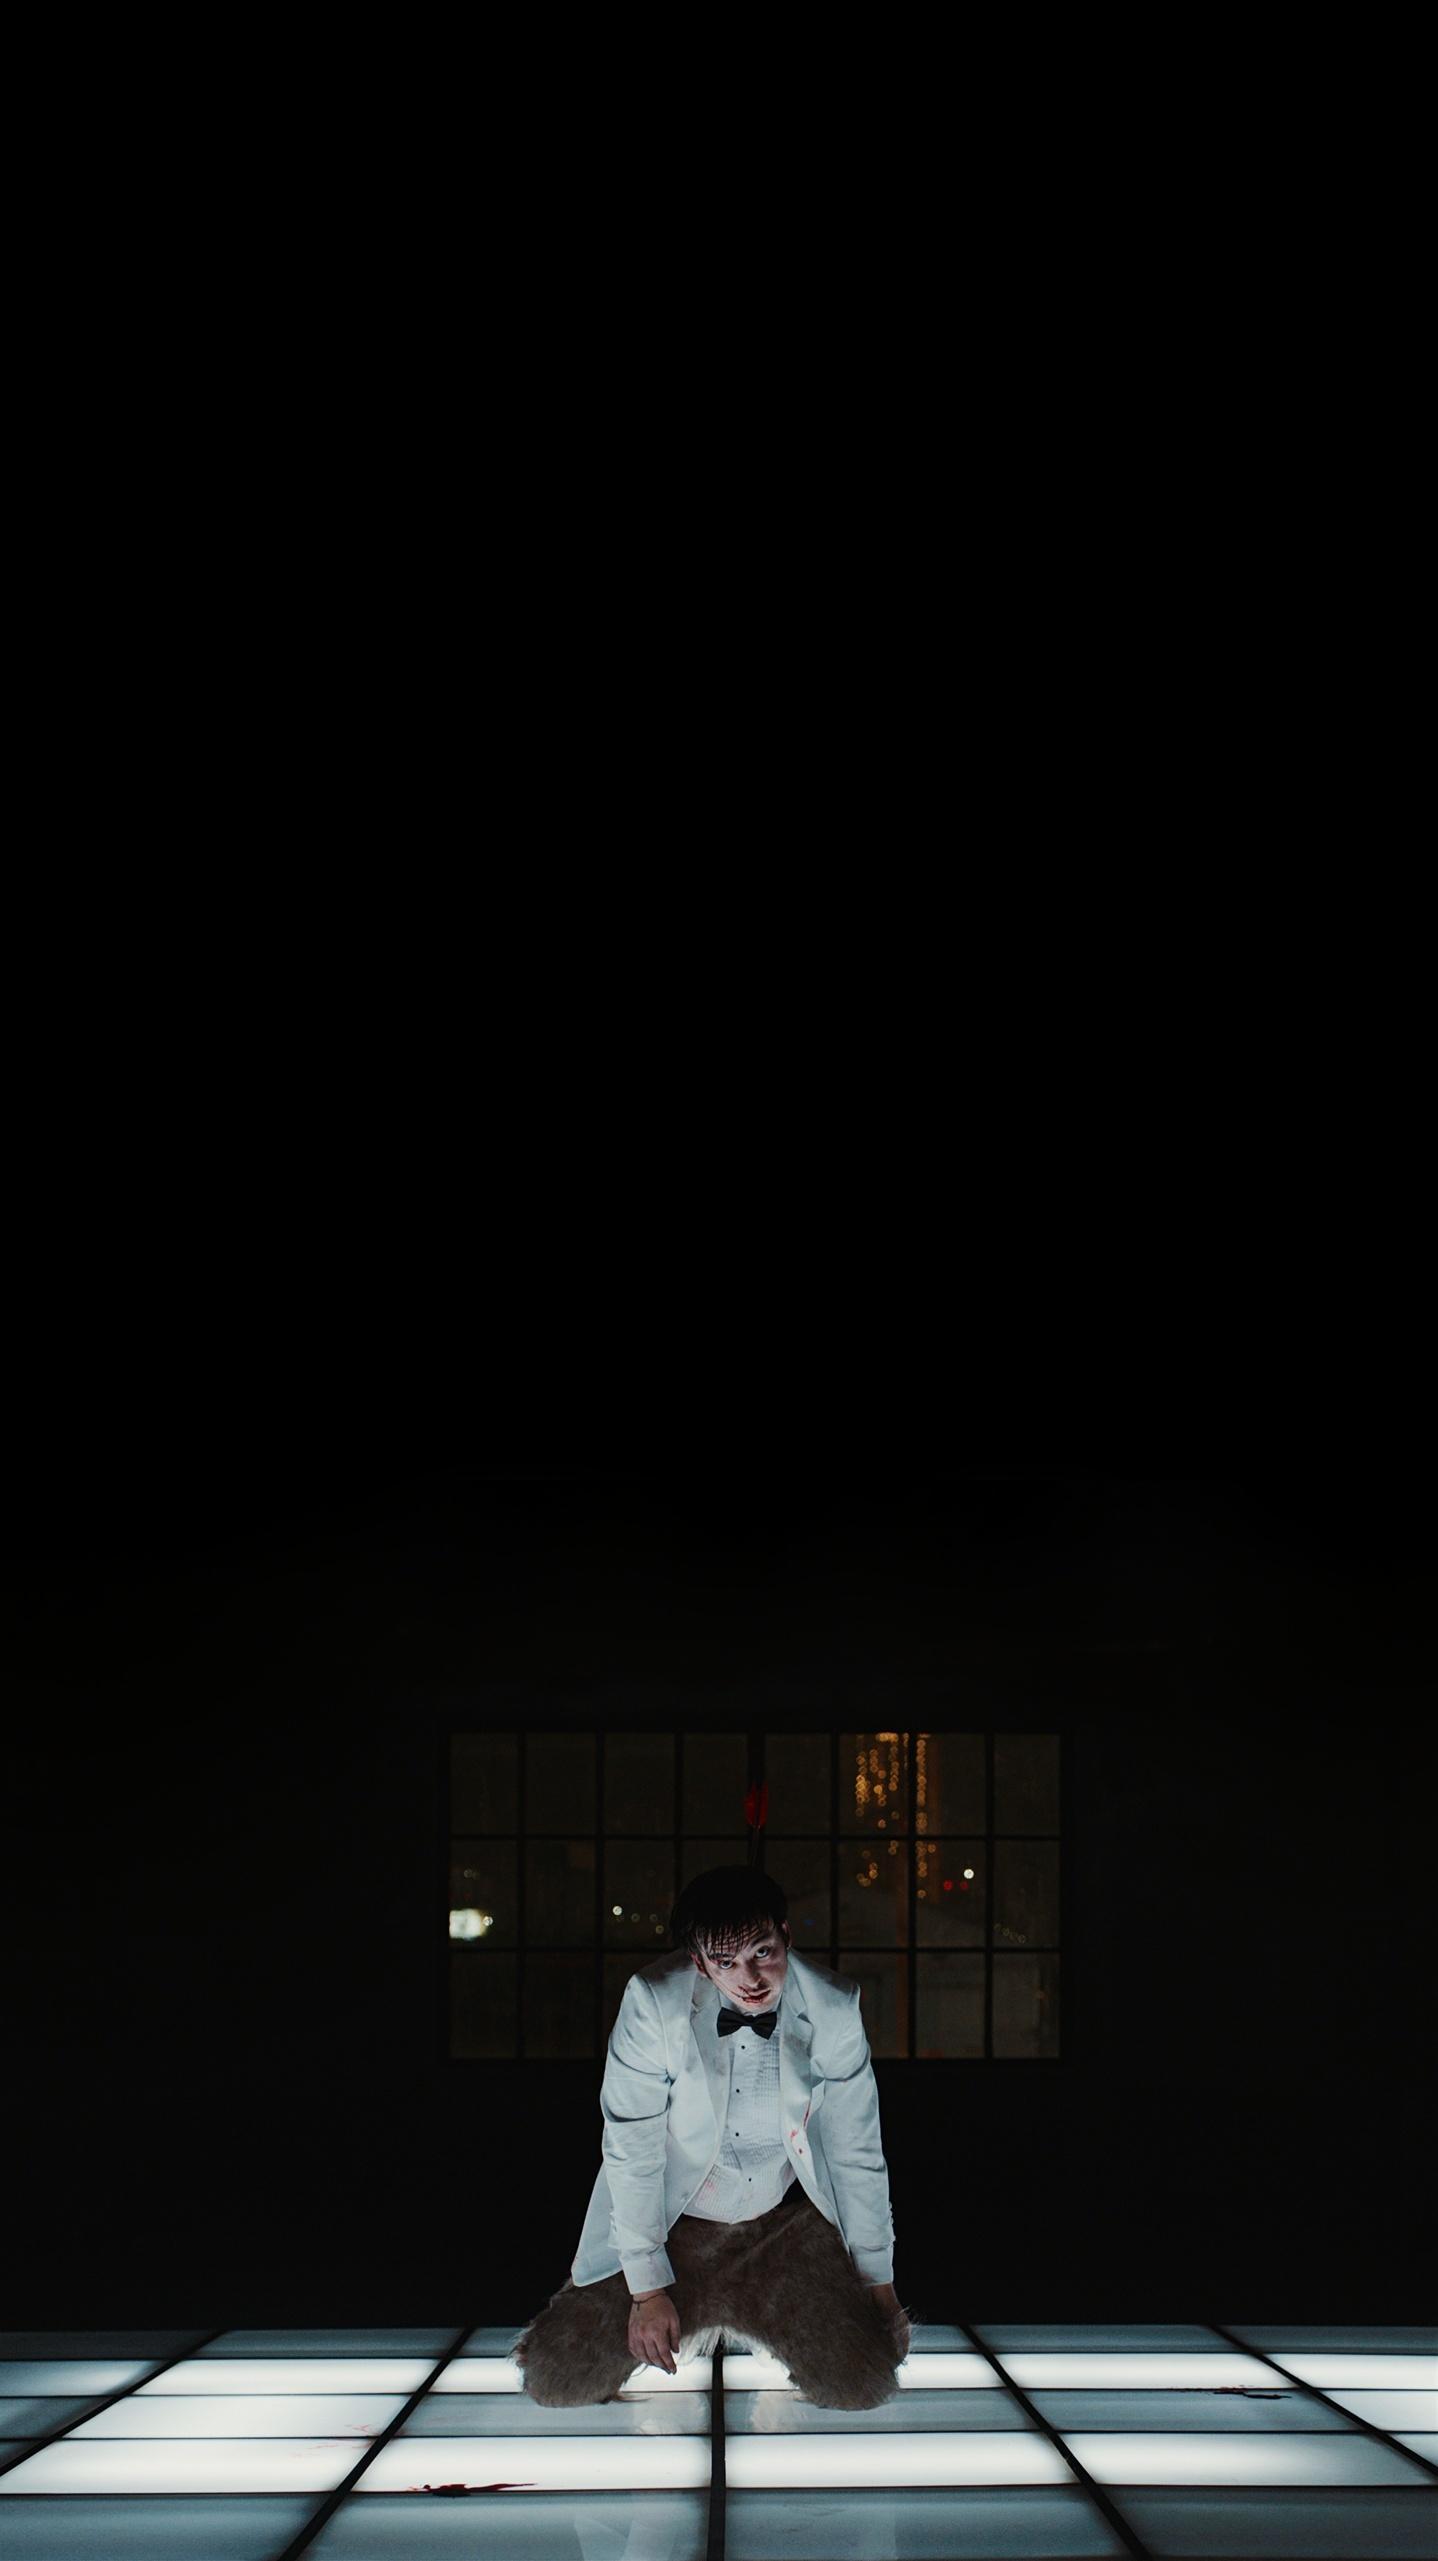 A joji wallpaper I made from slow dancing in the dark, 2560x1440